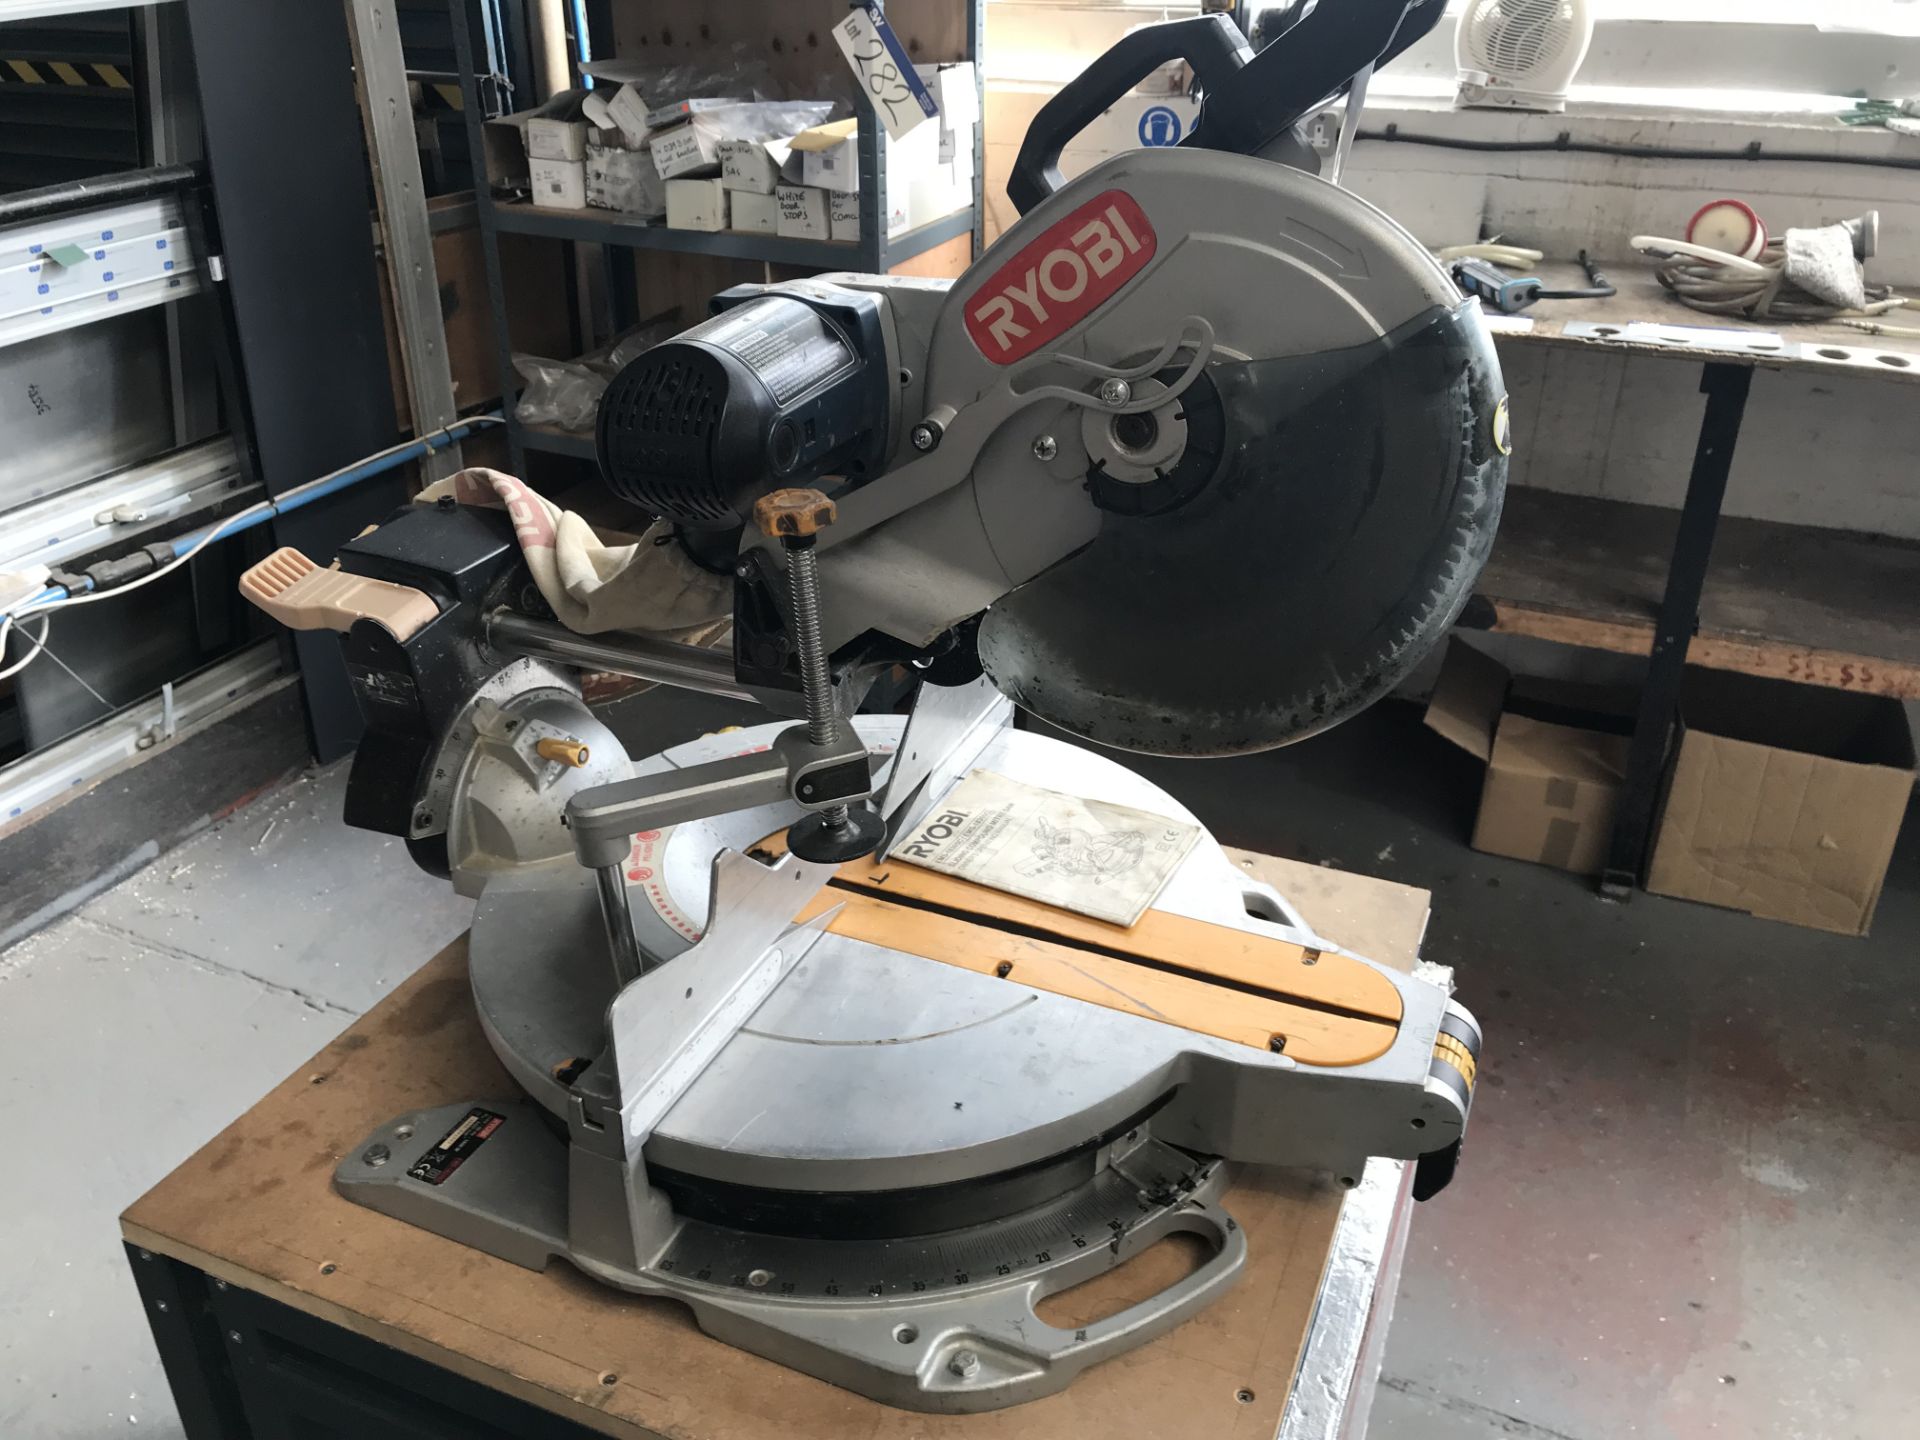 Ryobi EMS-1830SC Mitre Cutting Saw, serial no. 0905-001082, 110V, 240V with benchPlease read the - Image 2 of 3